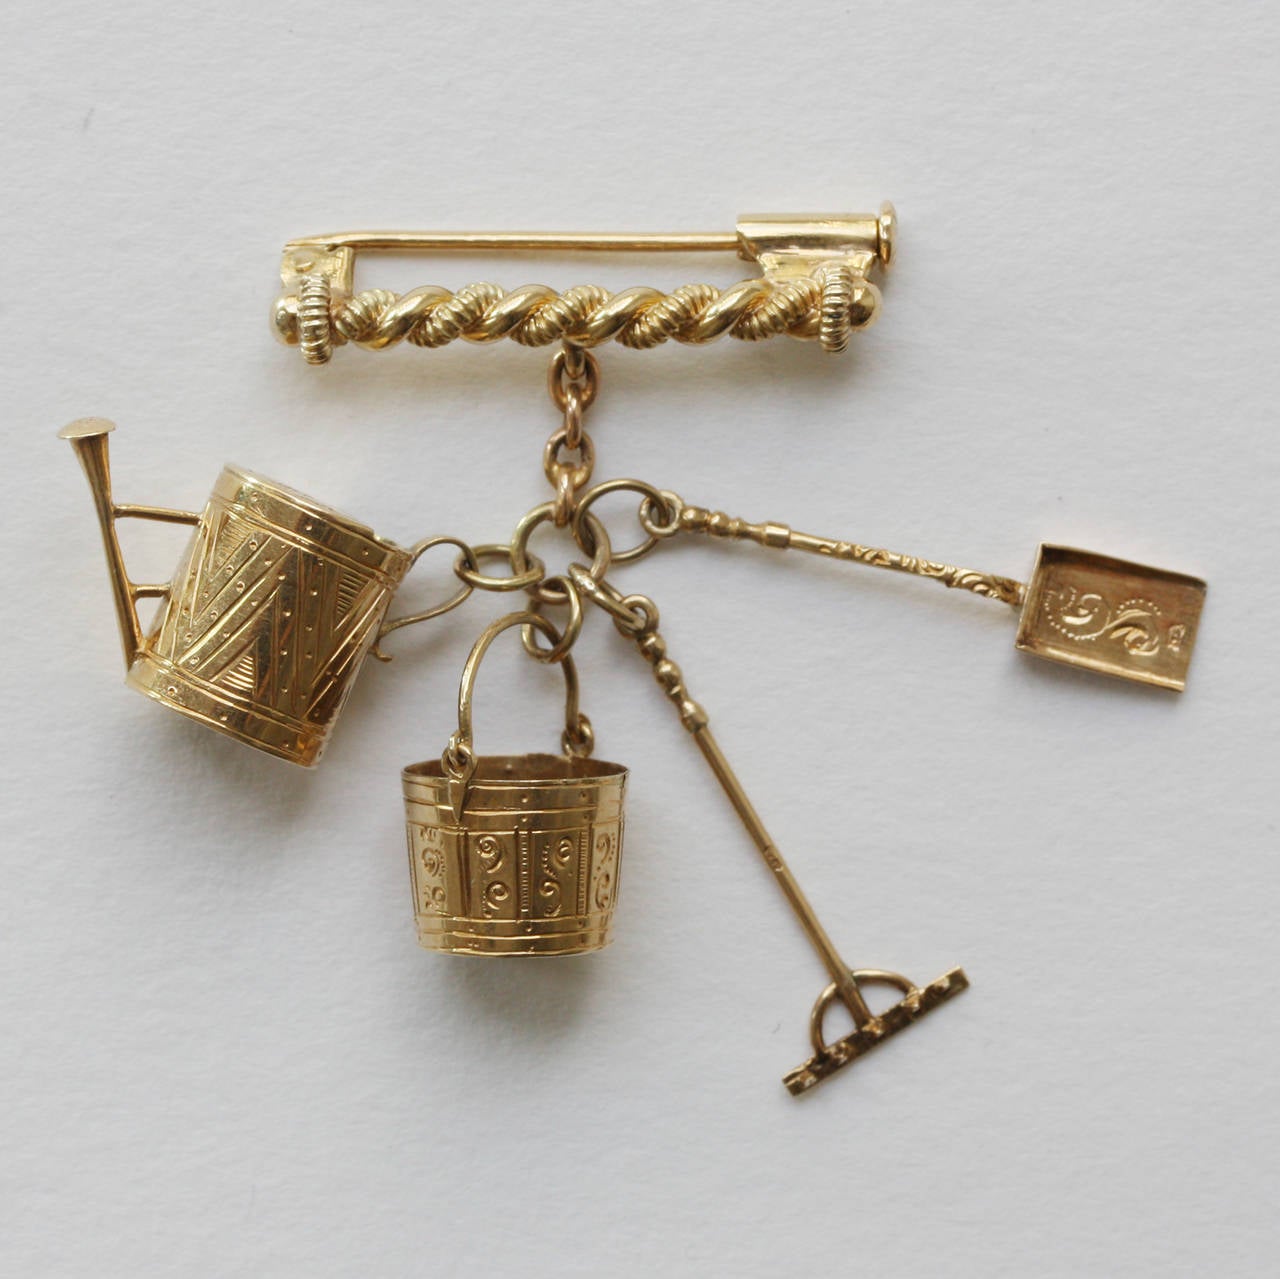 A set of four early 18 carat gold charms; bucket, shovel, rake and watering can, set to a later brooch fitting, The Netherlands, circa 1830 (Dutch gold mark before 1837).

weight: 9 grams